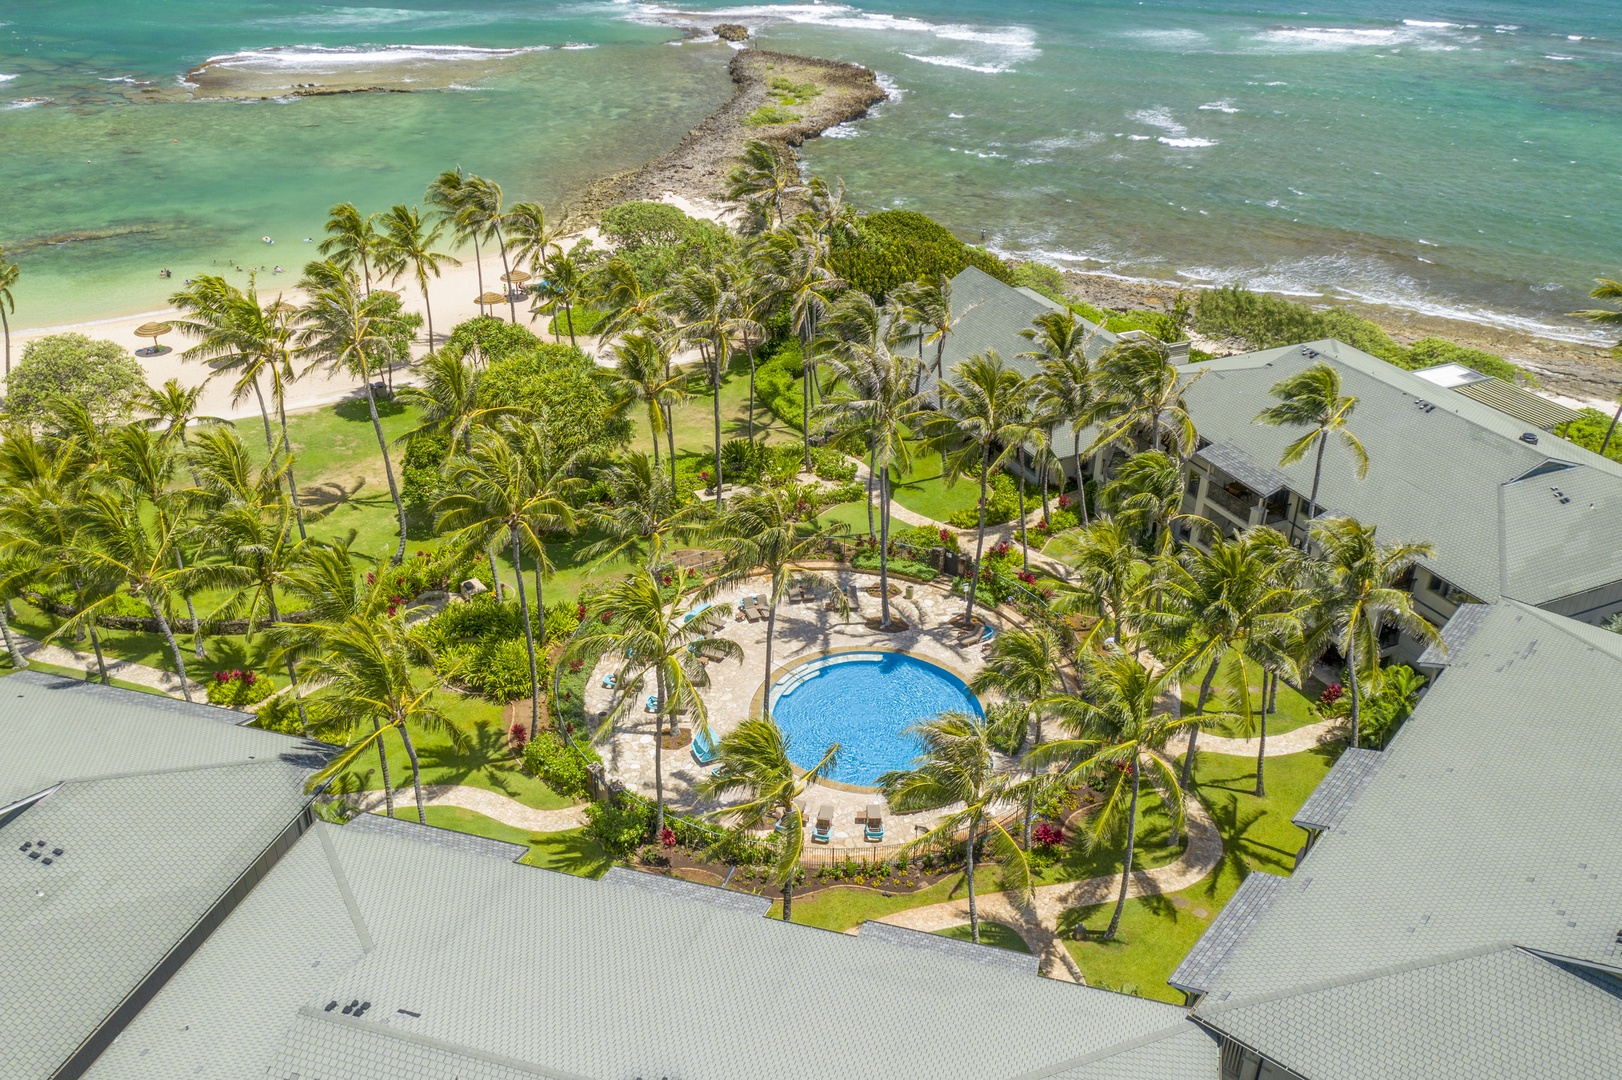 Kahuku Vacation Rentals, Turtle Bay Villas 205/206 - Perfectly located on the world-famous North Shore of Oahu within an 850-acre community, Turtle Bay includes seven breathtaking beaches where guests can snorkel, stand-up paddle, kayak, bike, segway or stroll and unwind.